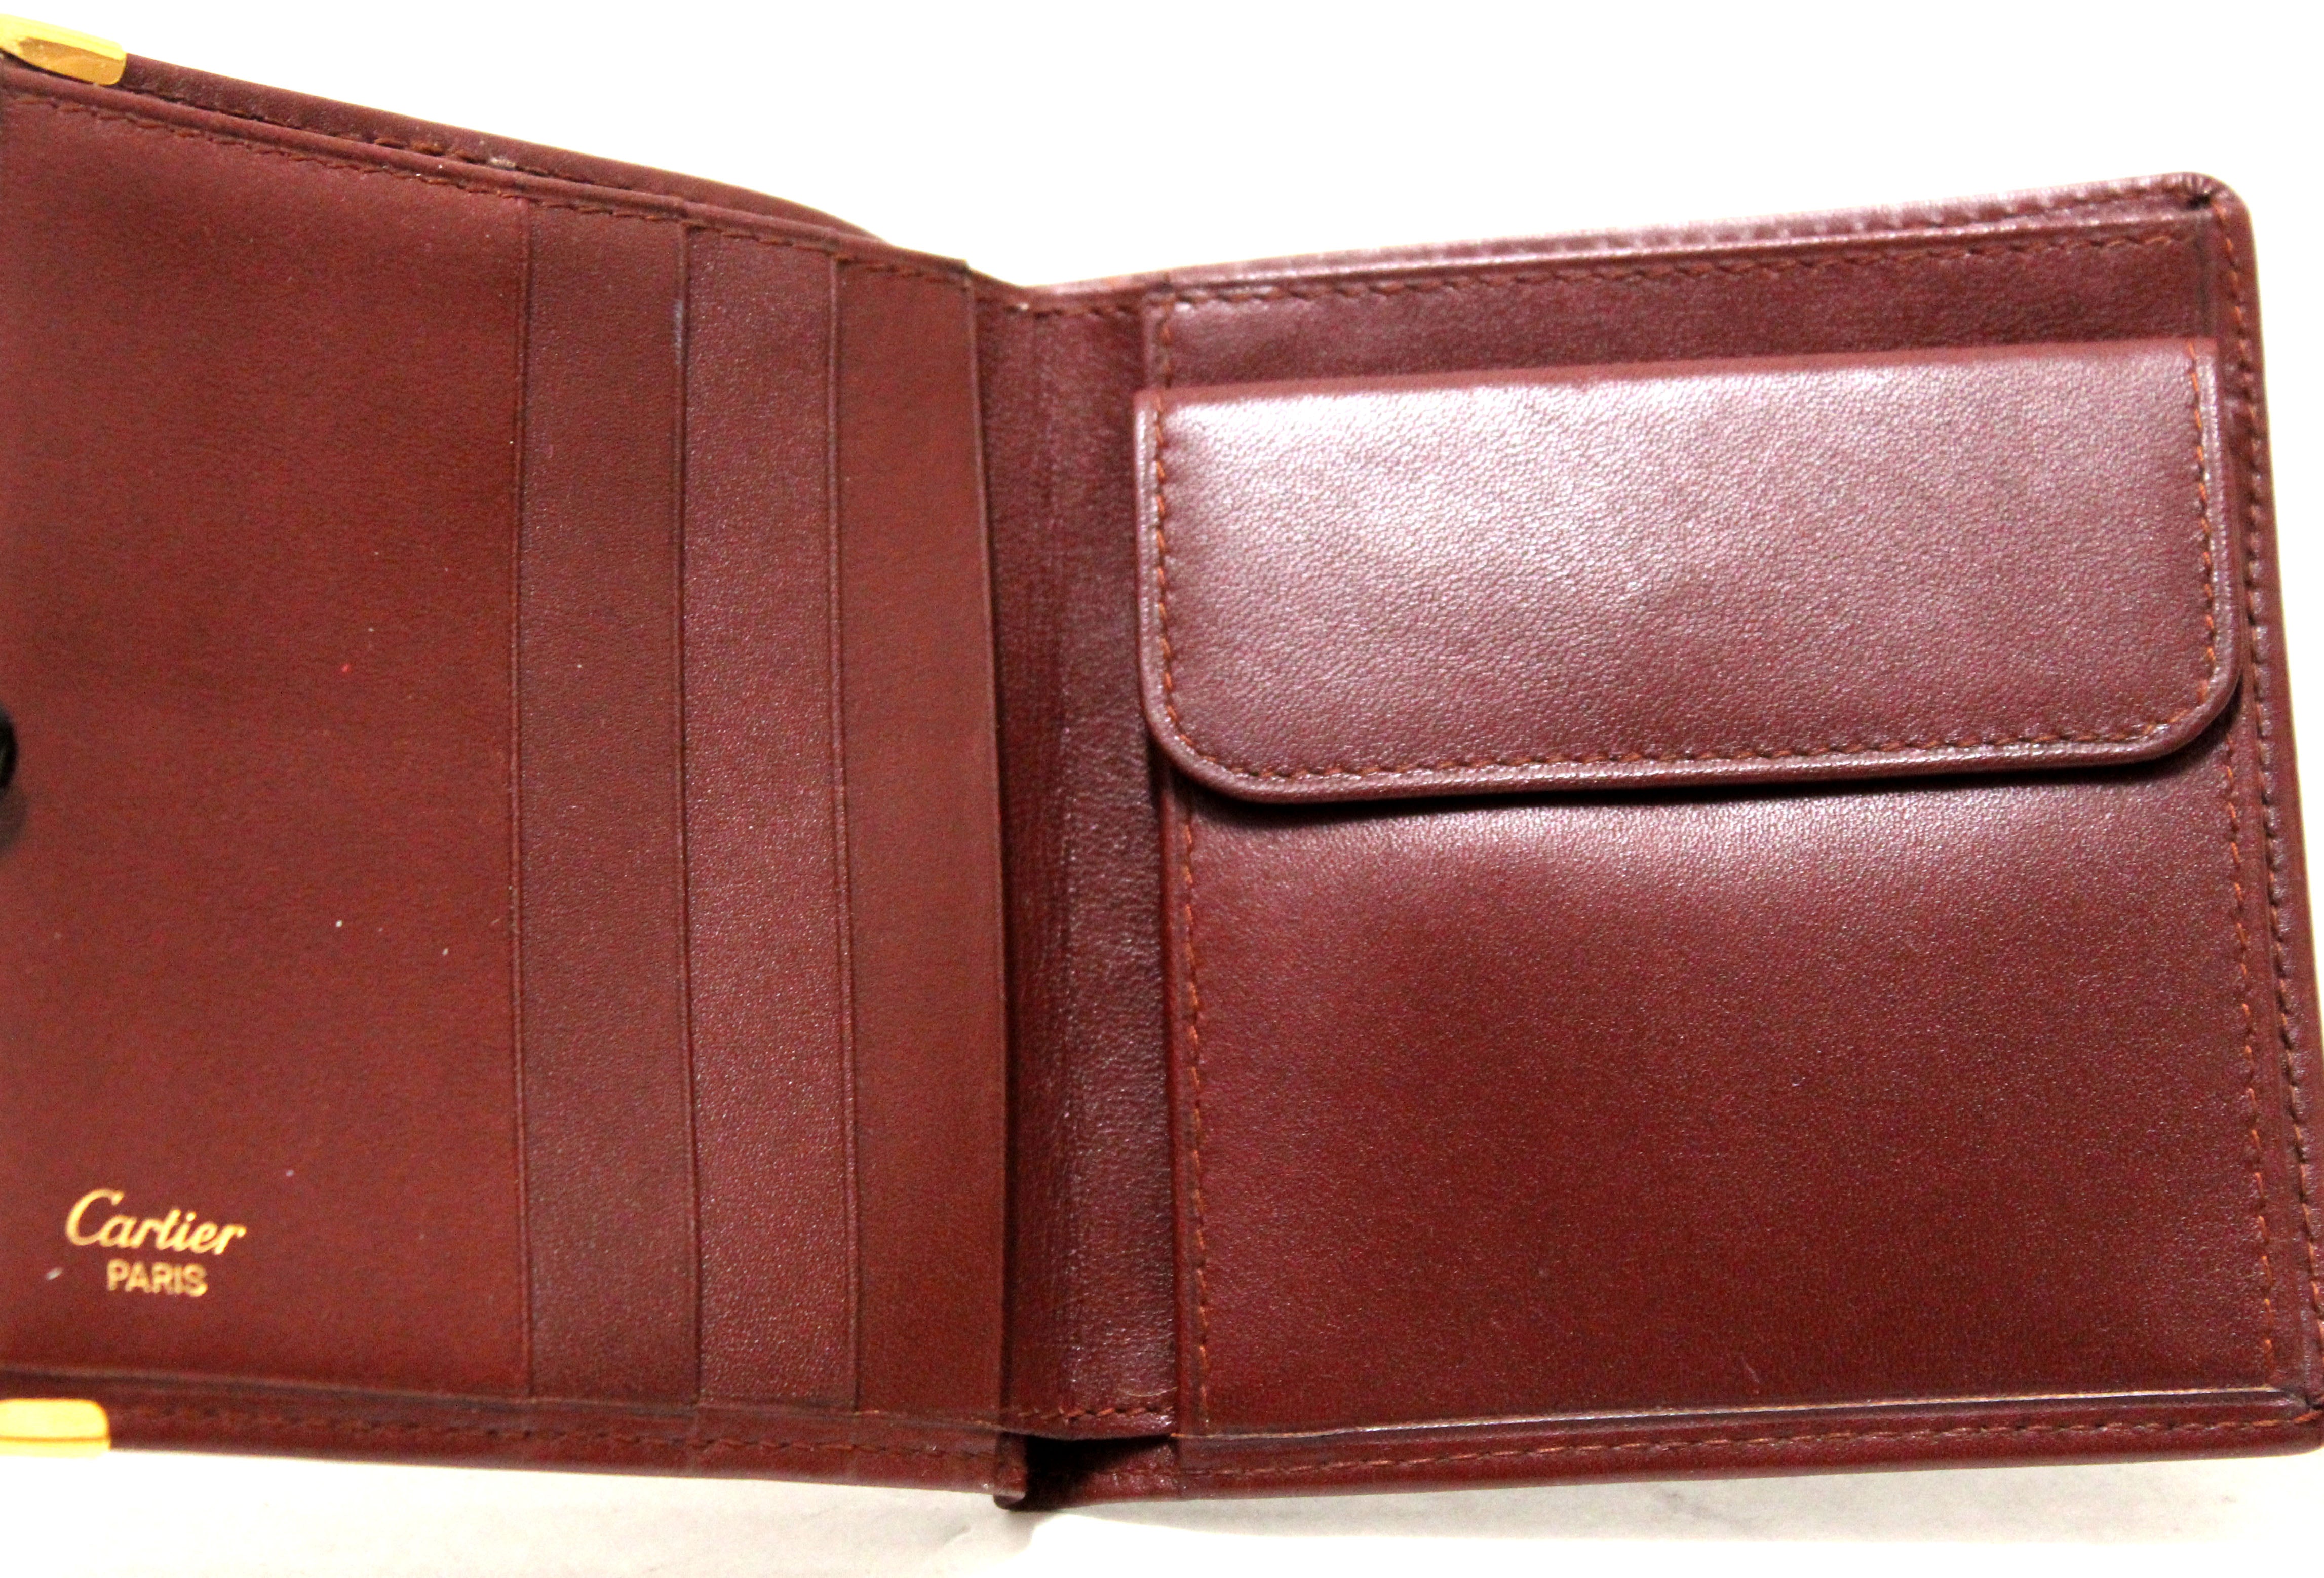 Authentic Cartier Vintage Burgandy Lambskin Leather Compact Wallet